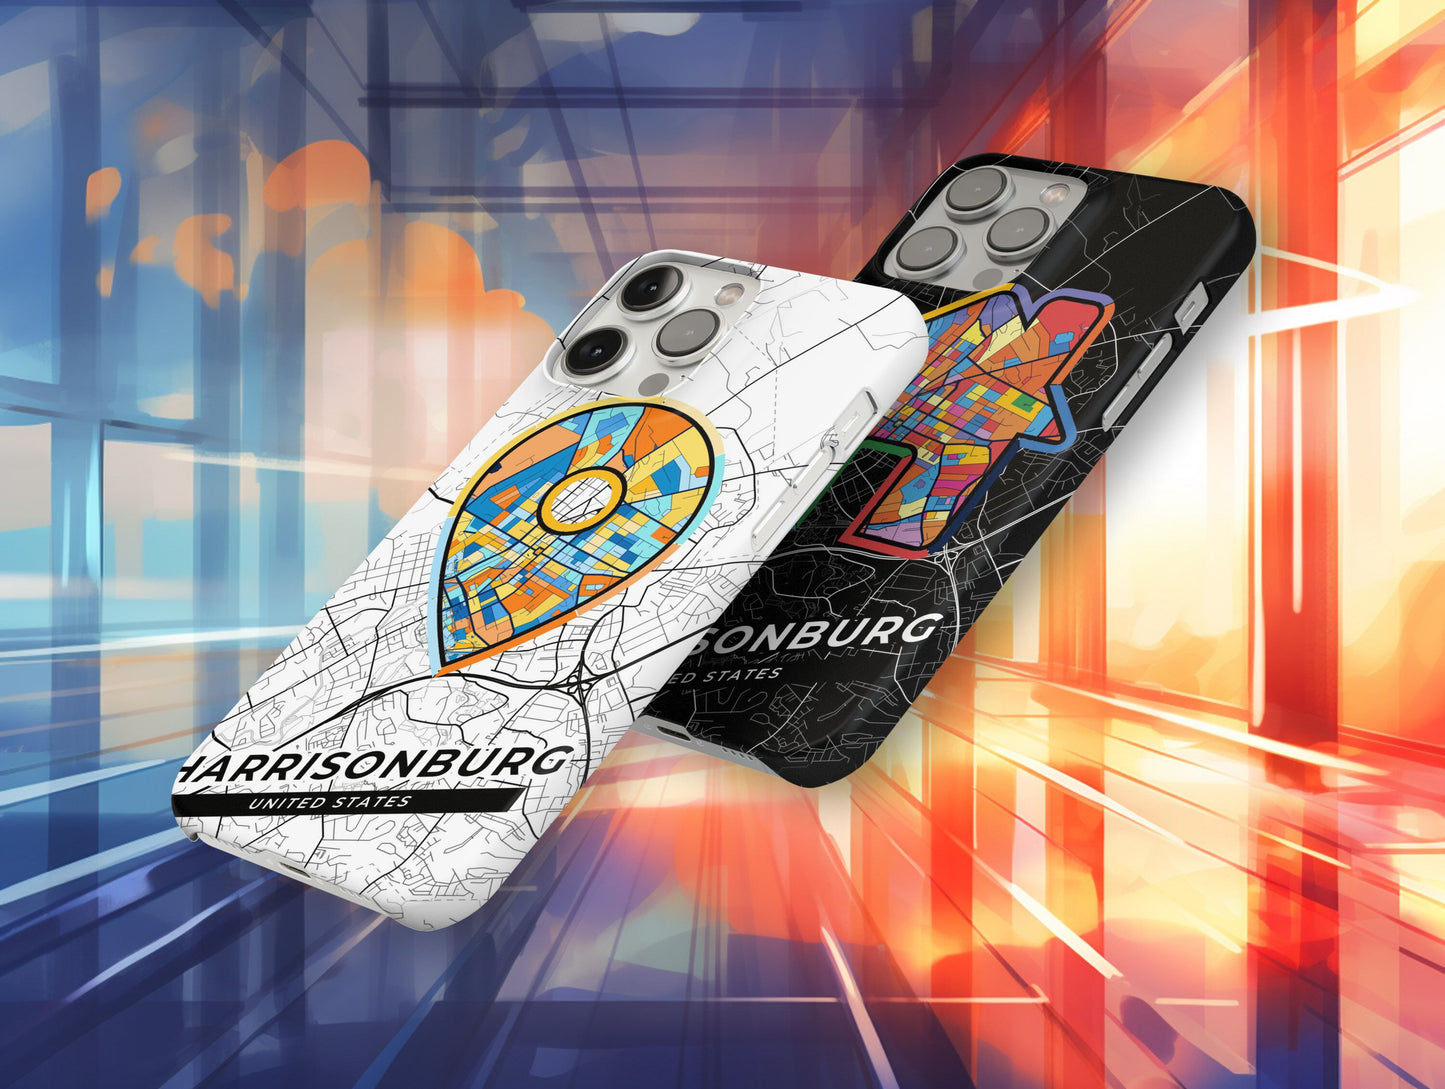 Harrisonburg Virginia slim phone case with colorful icon. Birthday, wedding or housewarming gift. Couple match cases.